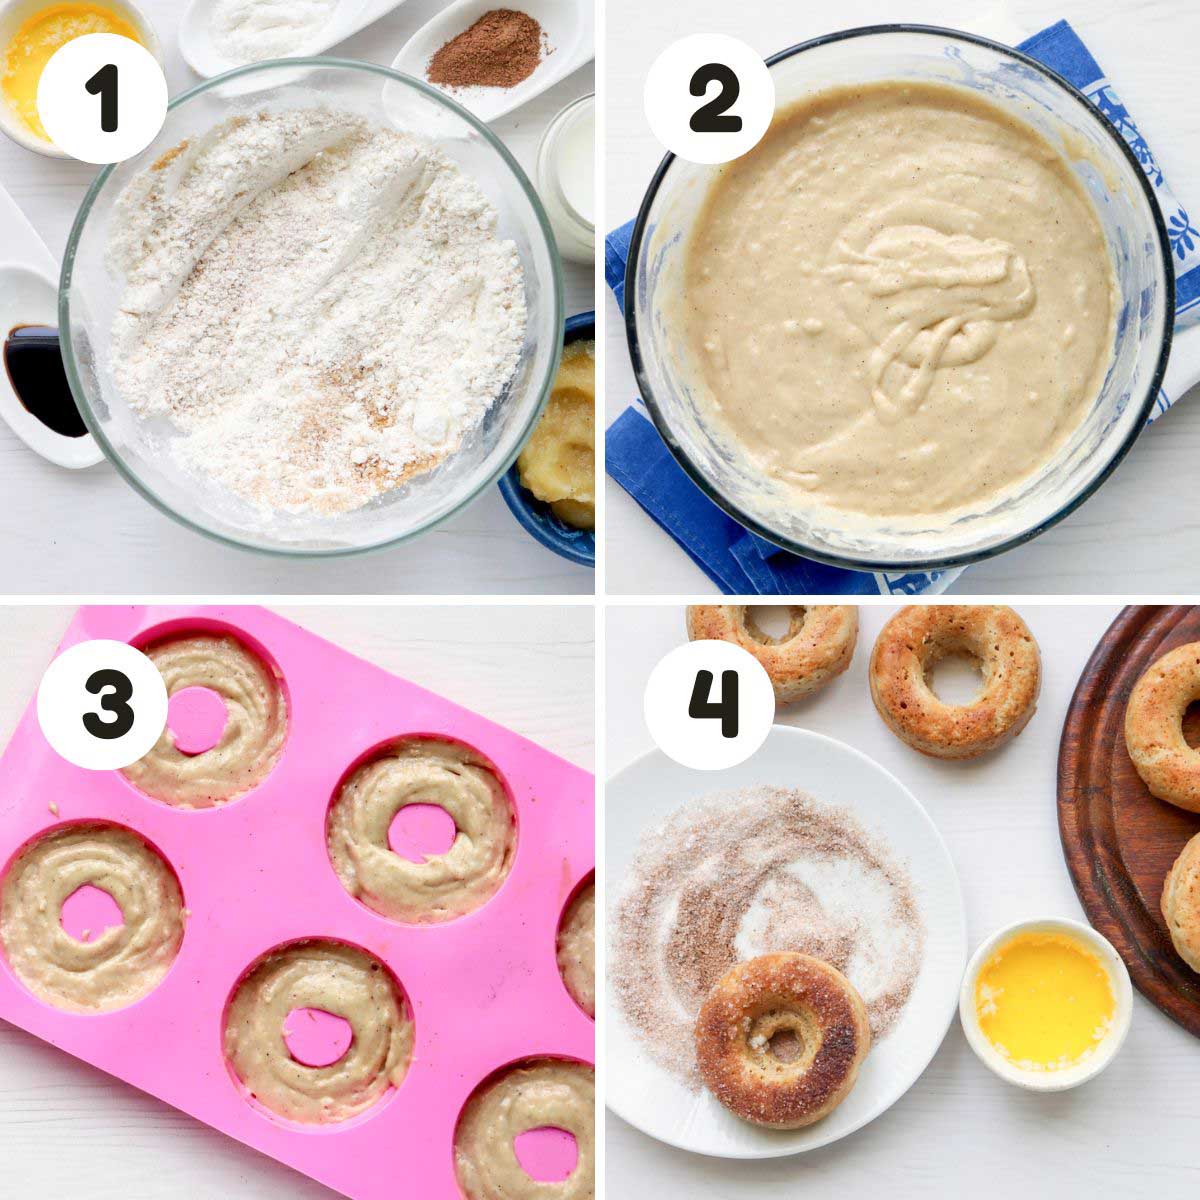 Steps to make the donuts.